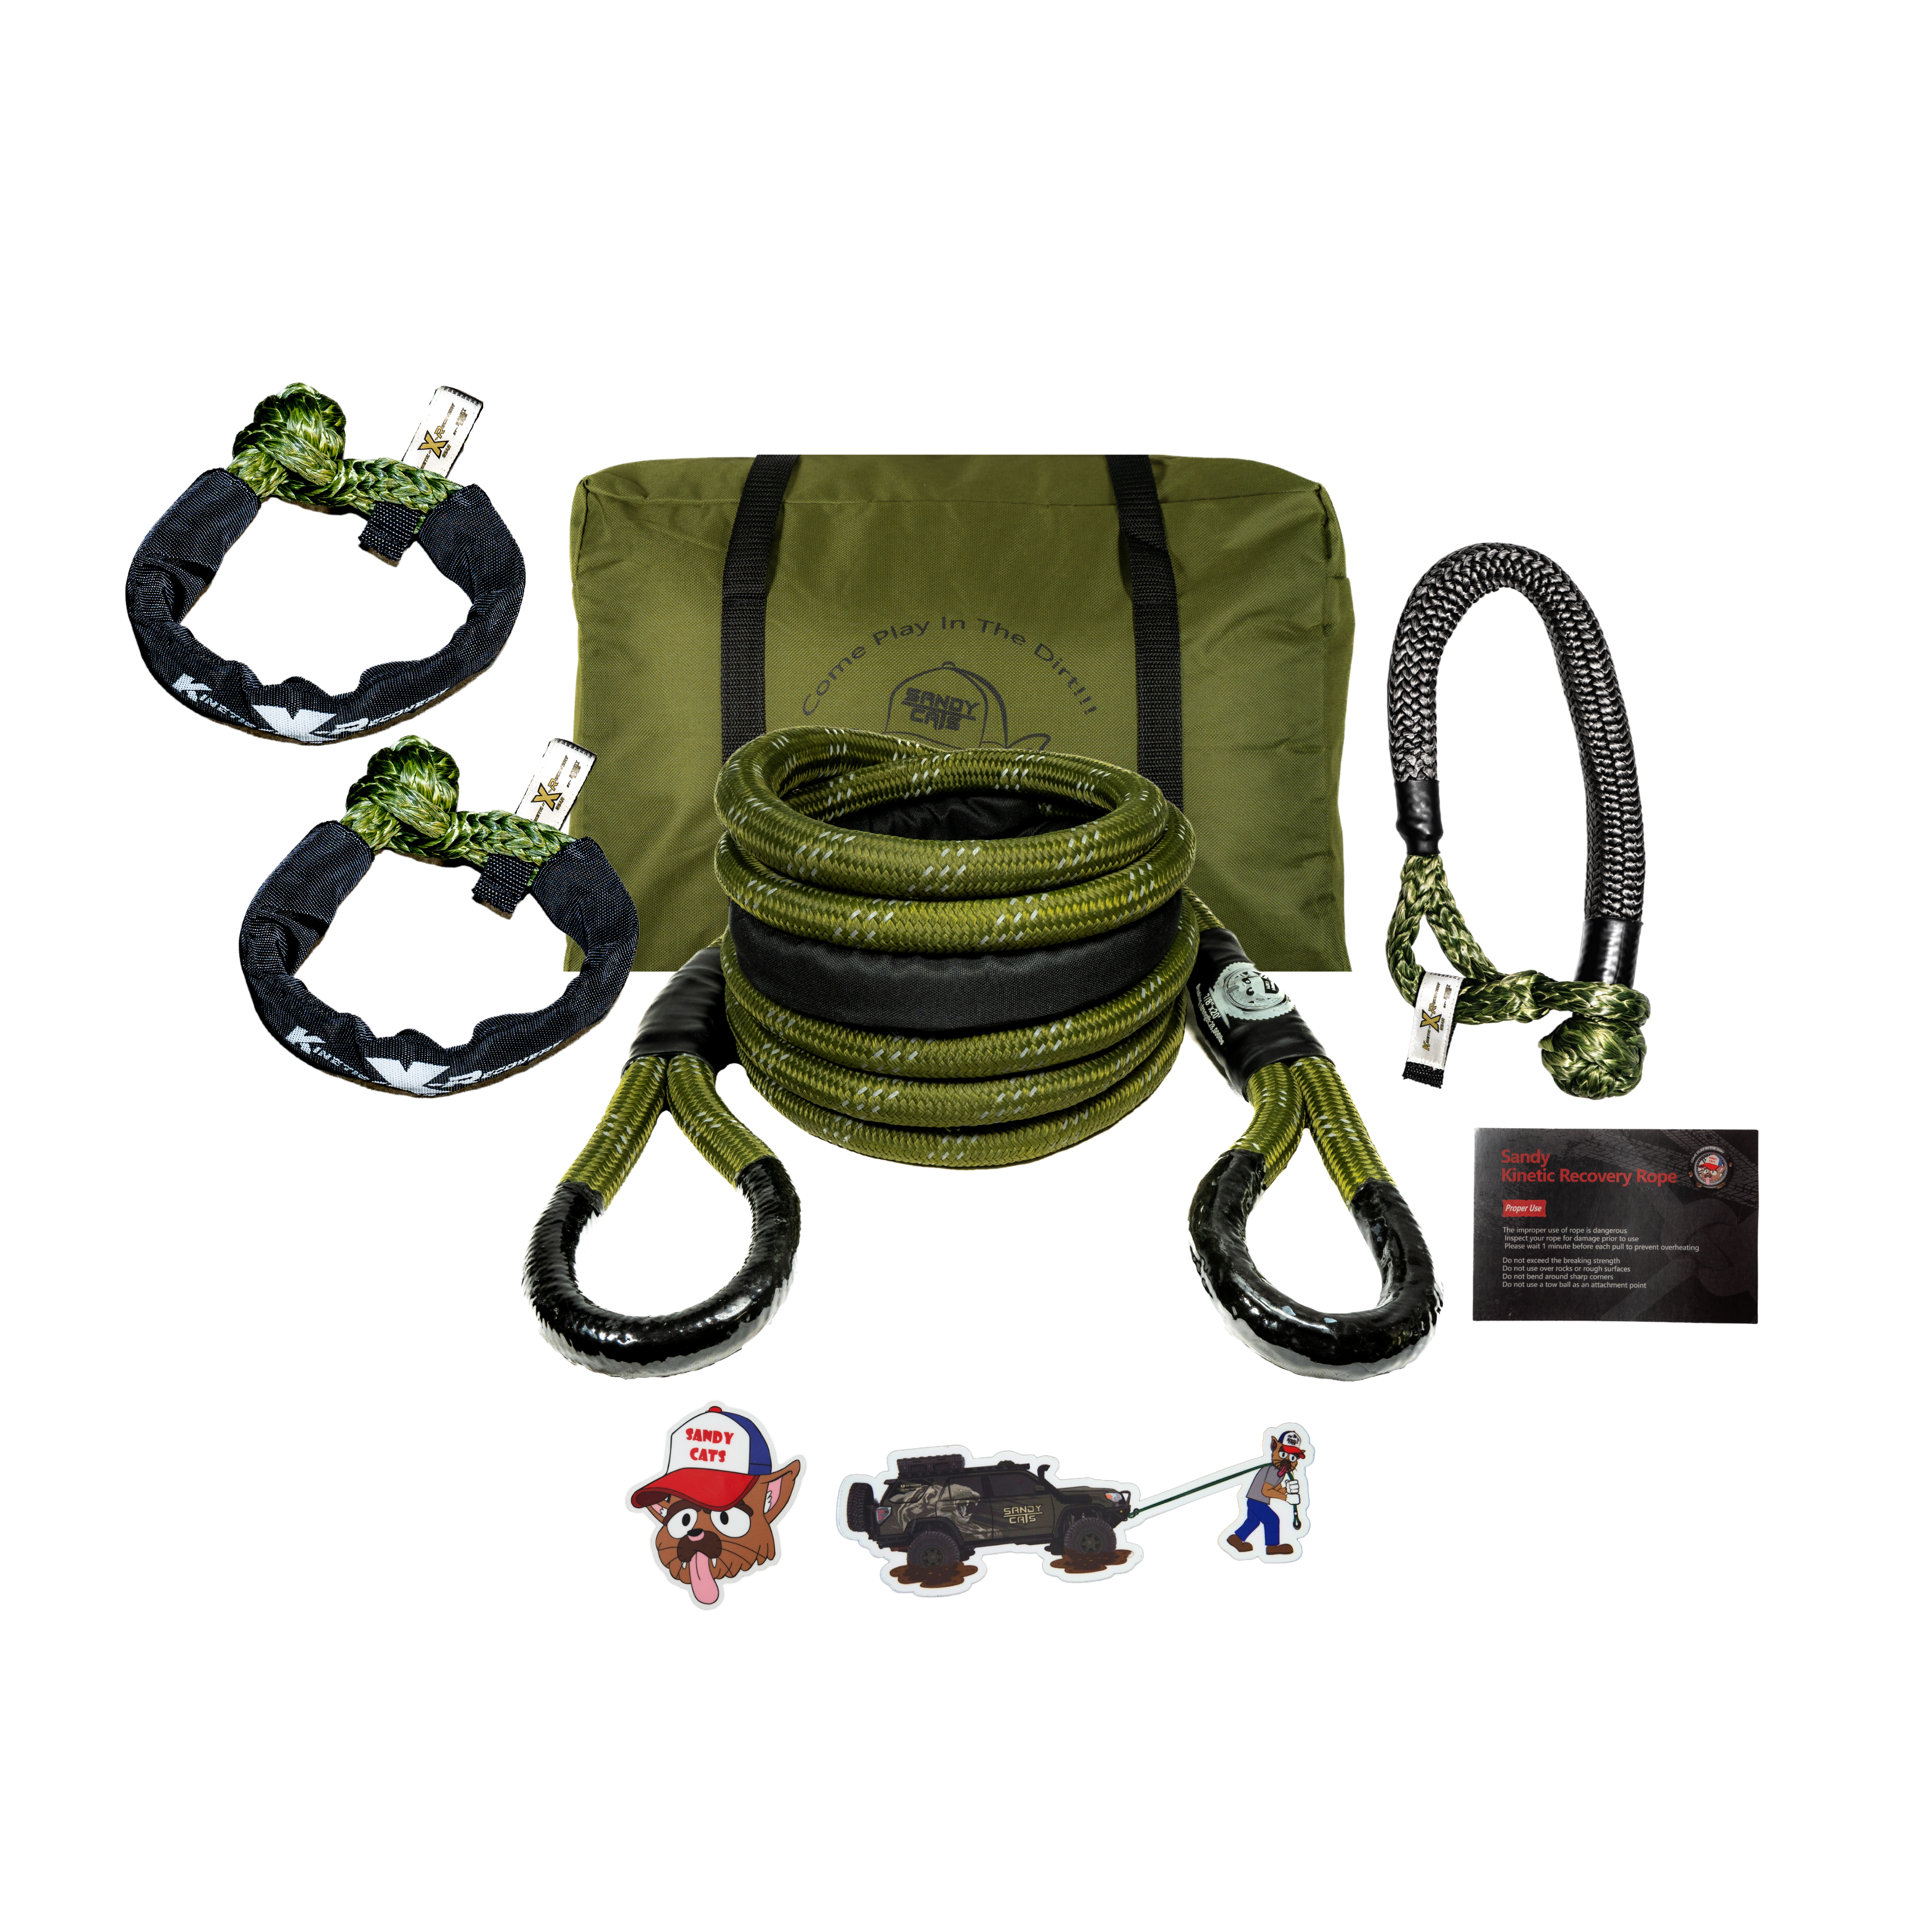 Kinetic-X Ultimate Recovery Kit, kinetic rope with soft shackles and hitch hero package